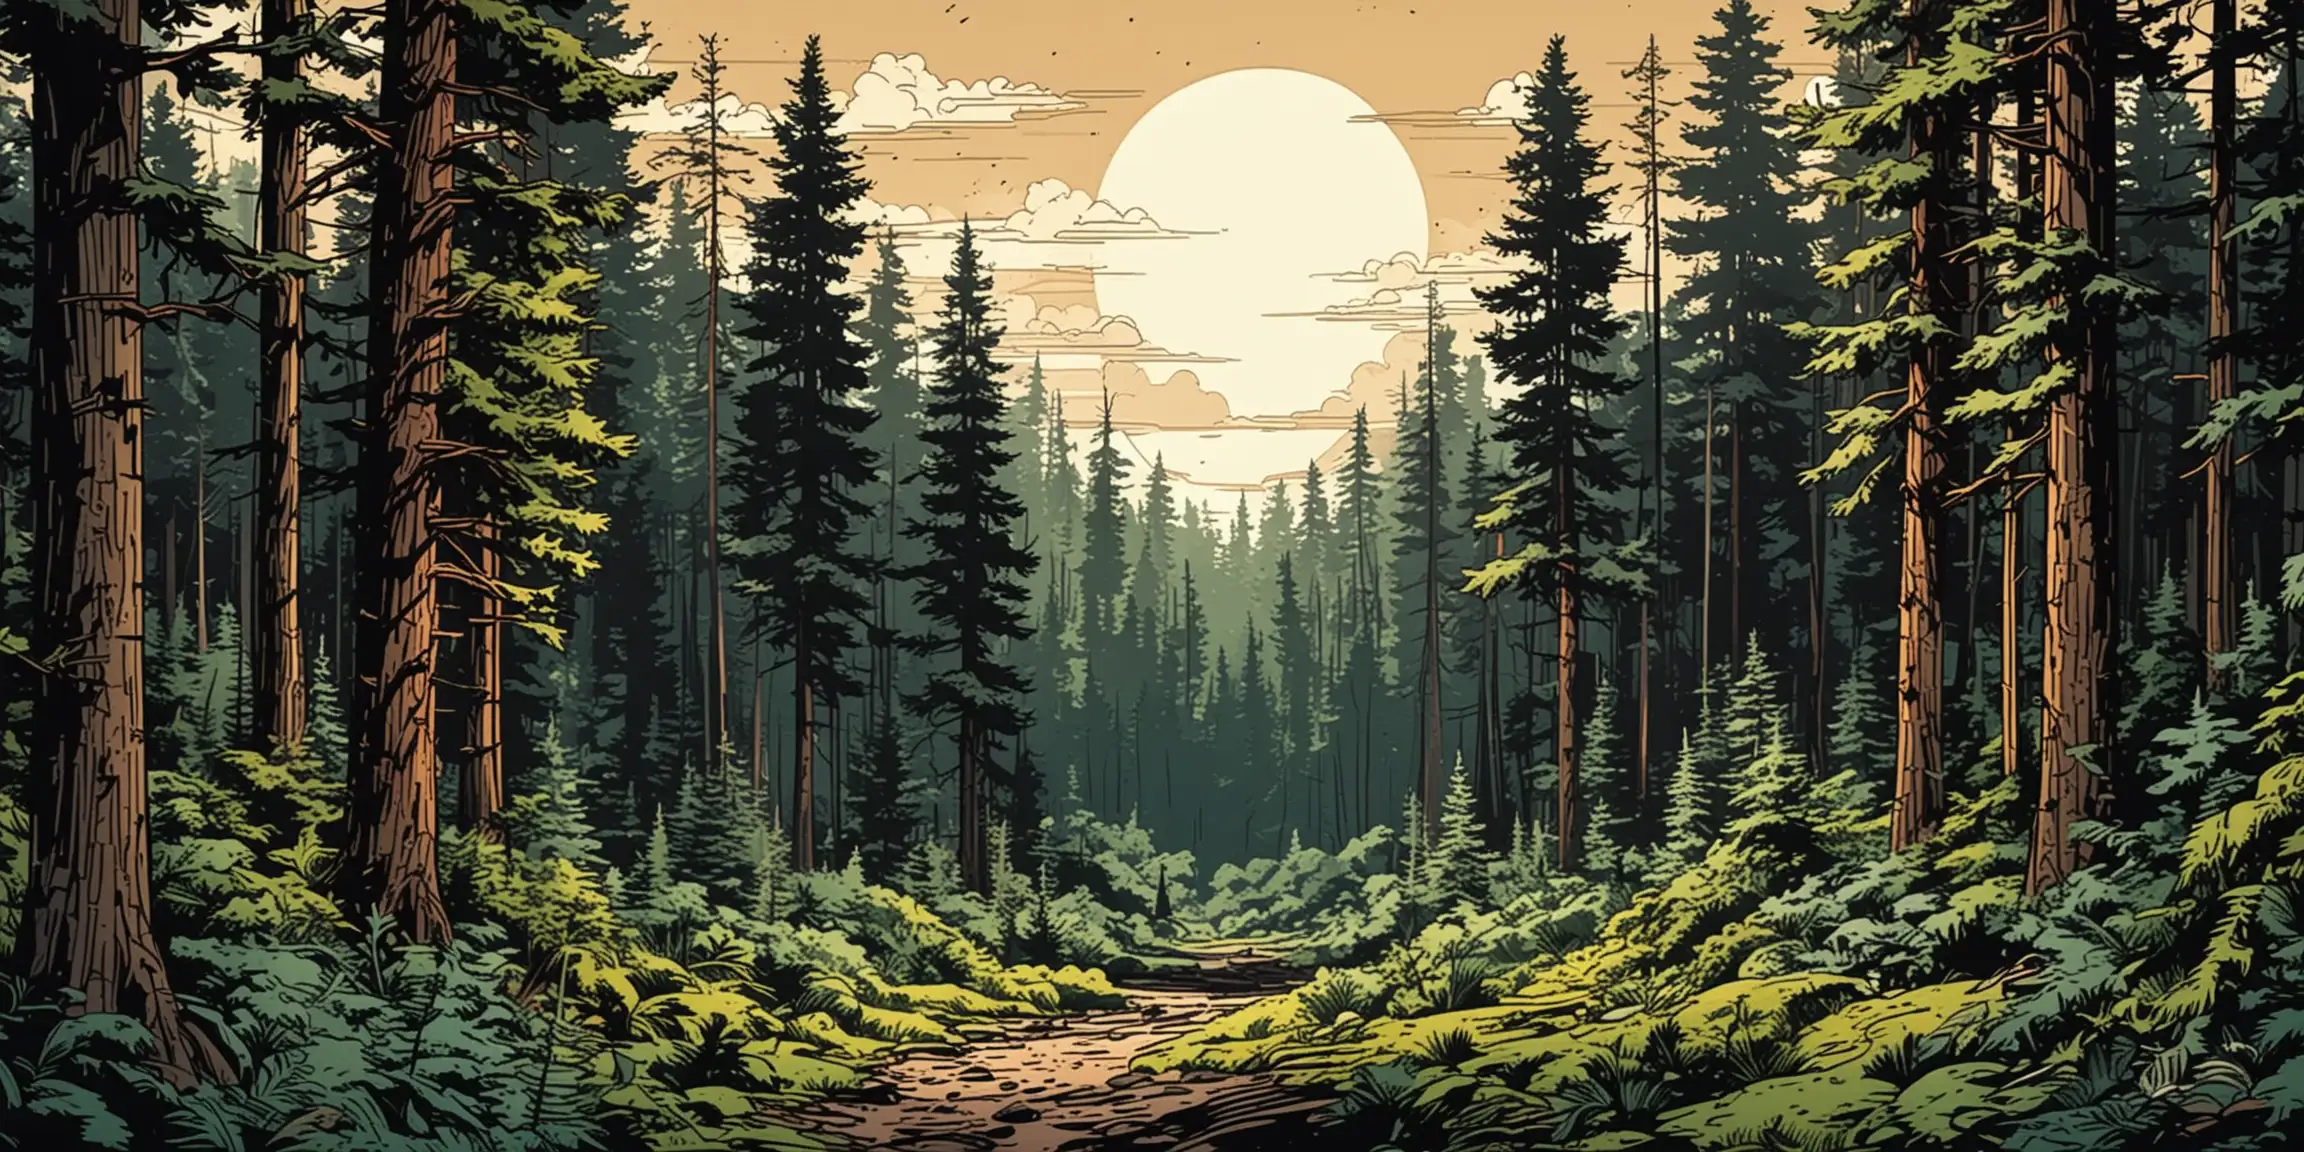 Lush Pine Forest Landscape with Comic Book Styling